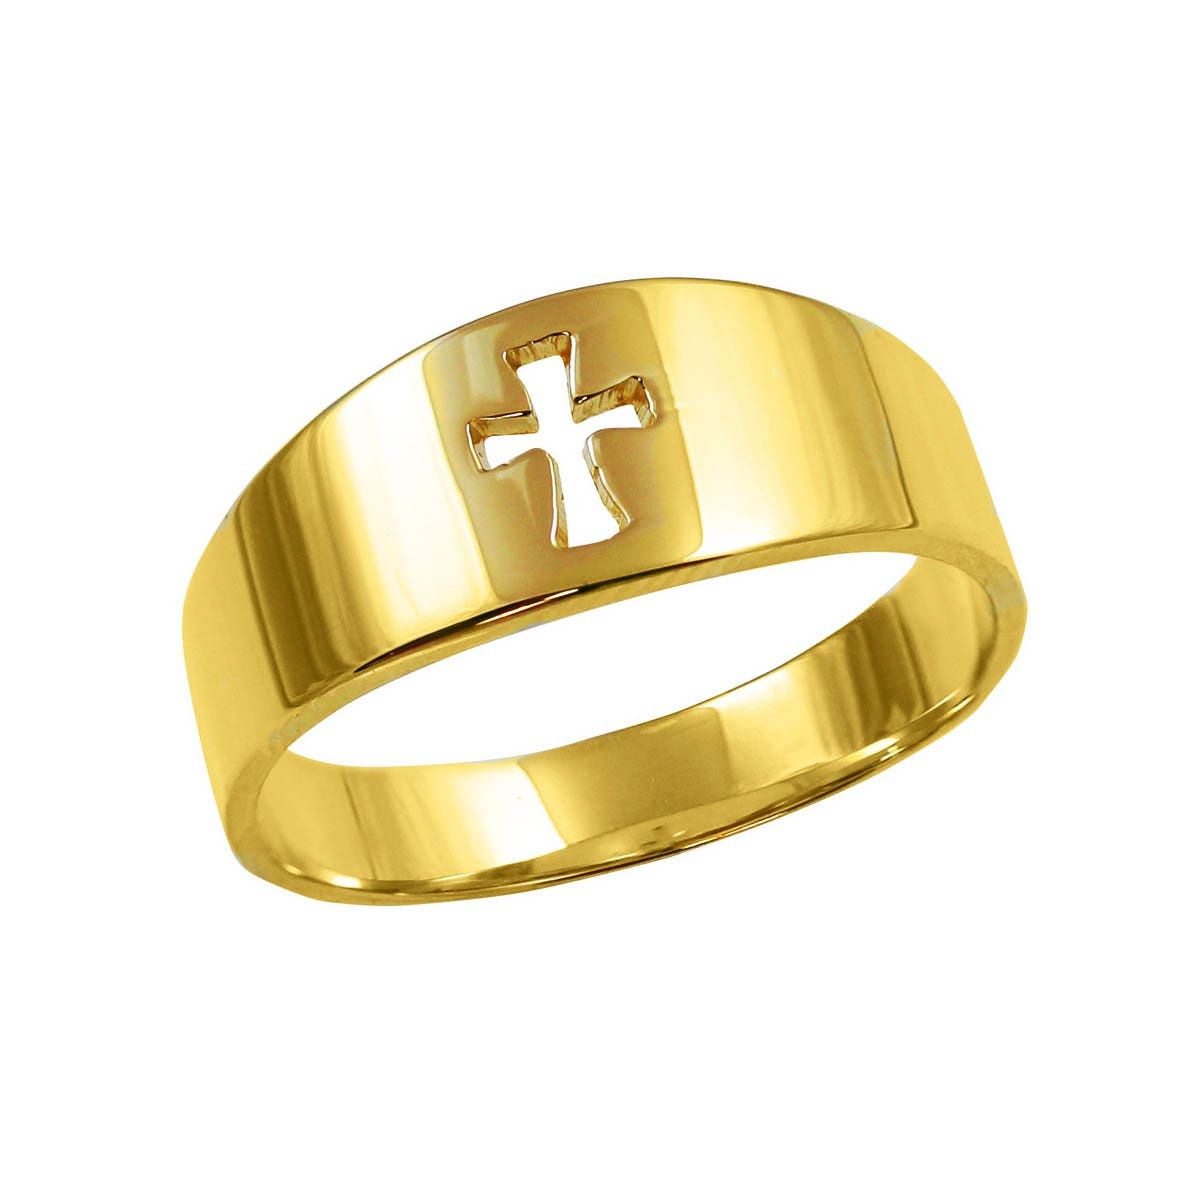 Gold Boutique - Mens Ring - Gold GOOFASH